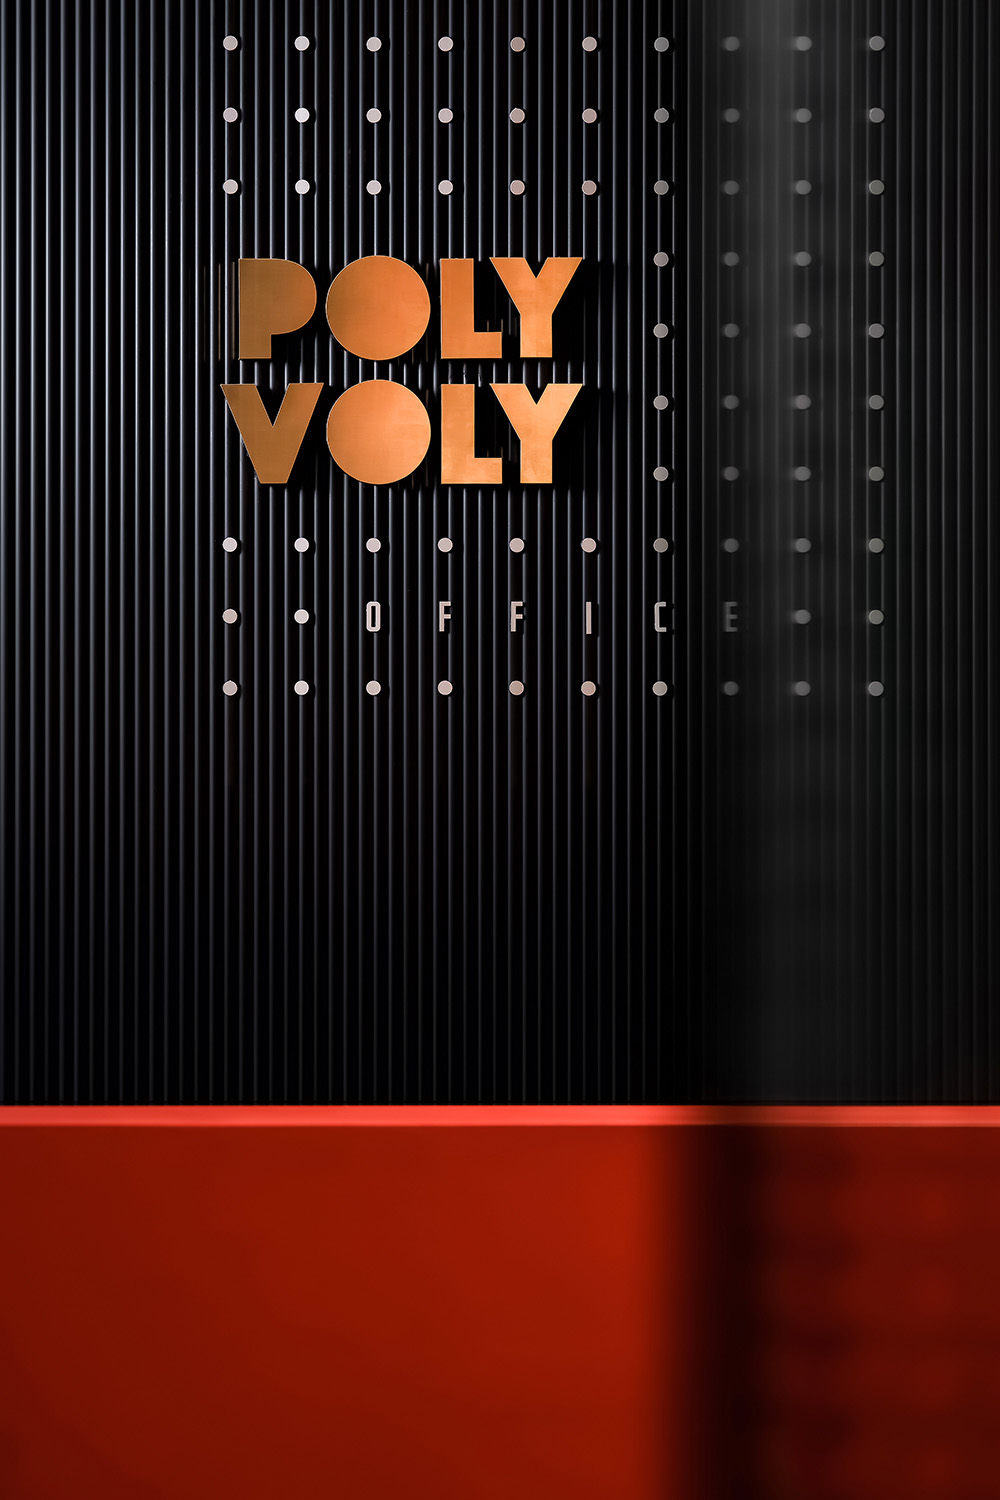   POLY VOLY人칫